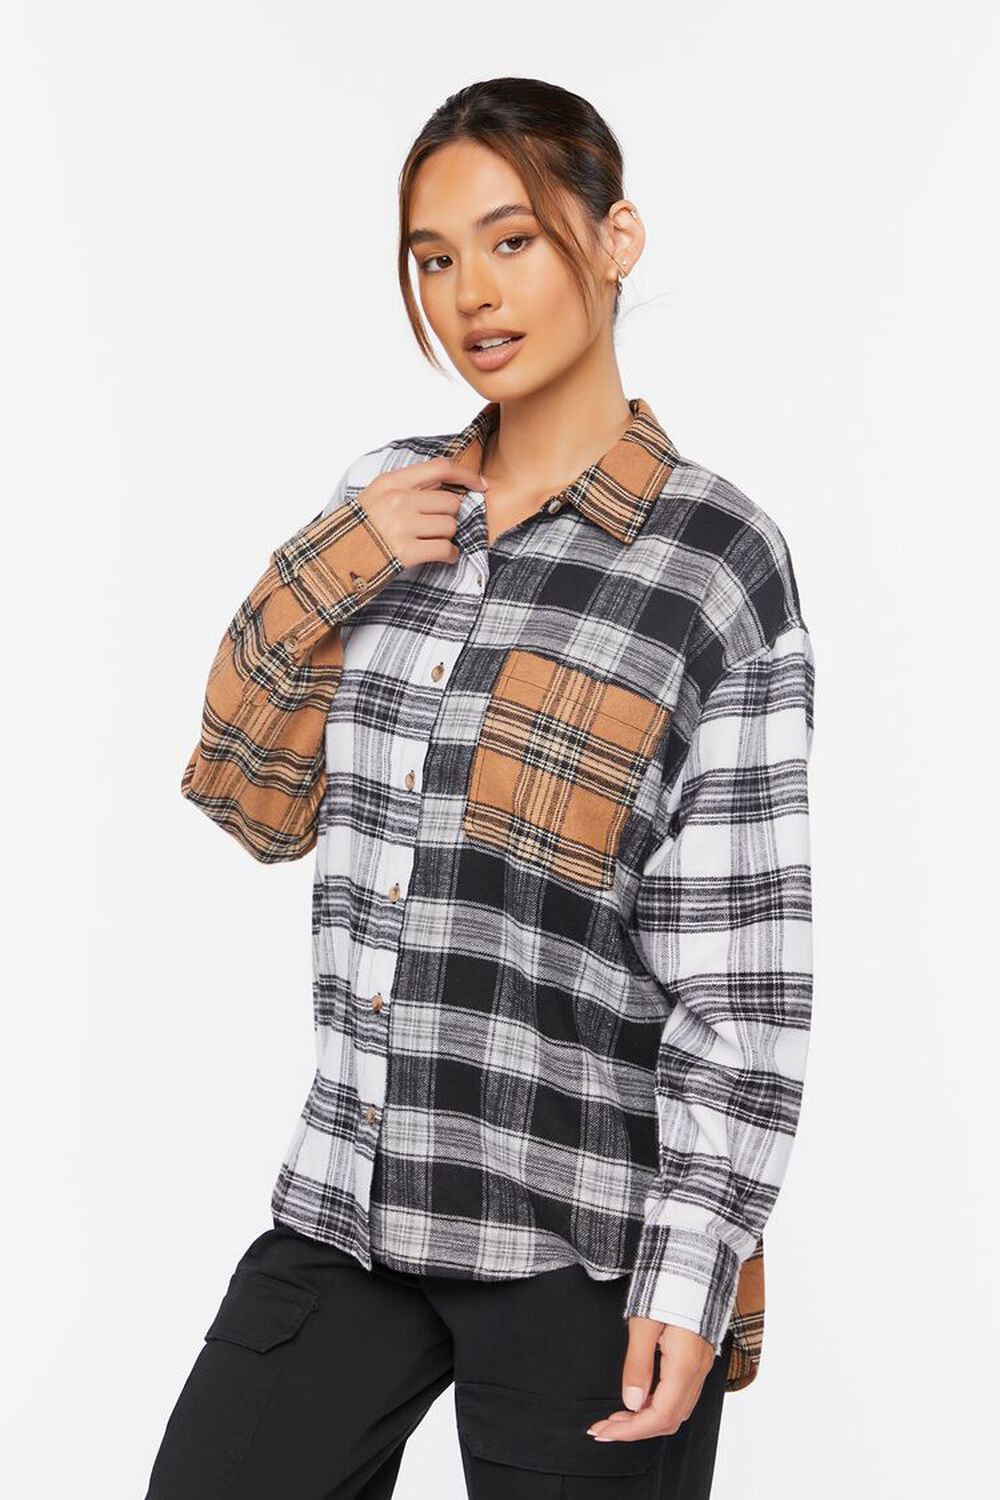 WHITE/MULTI Reworked Plaid Flannel Shirt, image 2